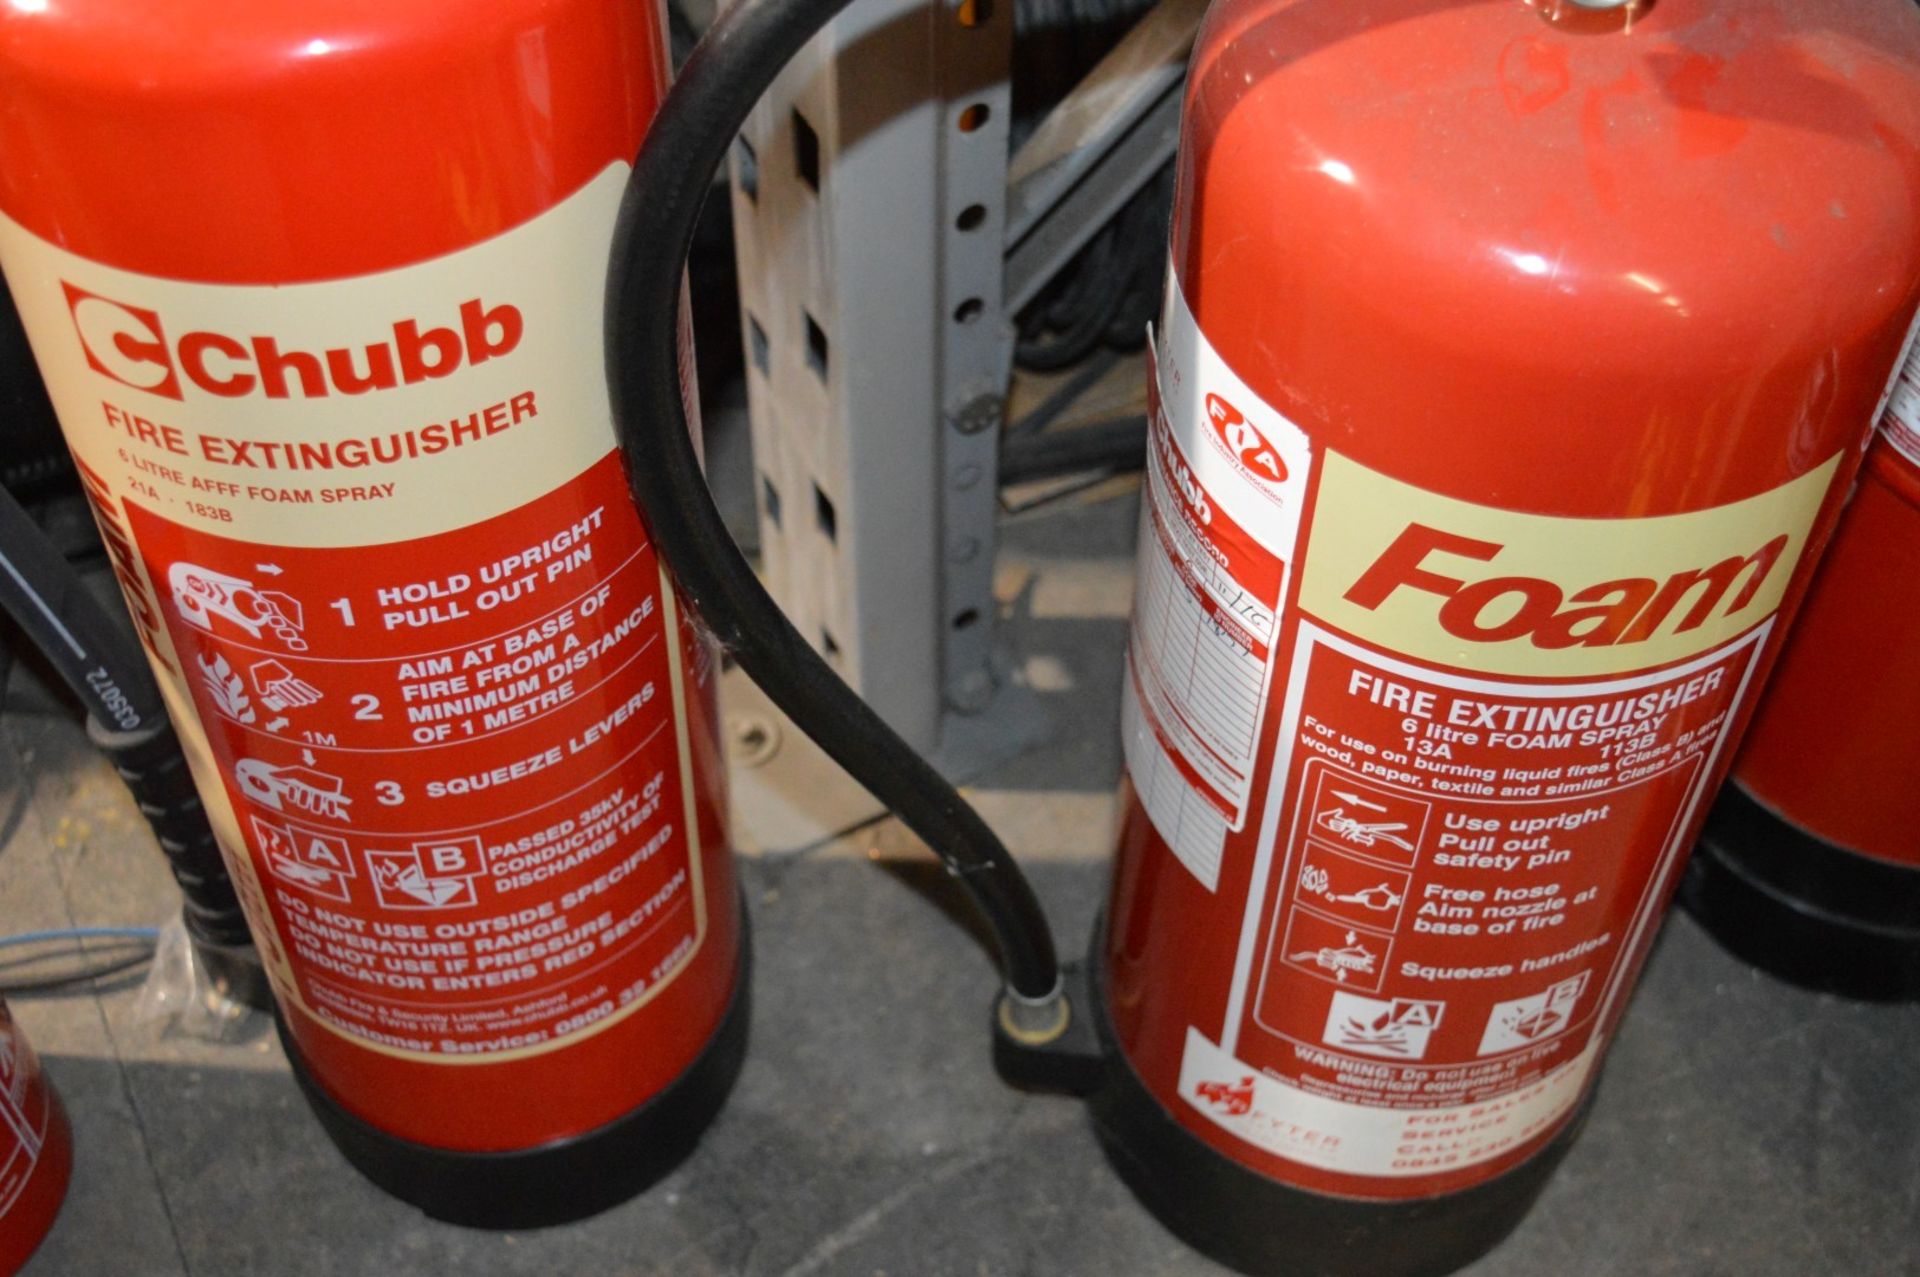 9 x Various Fire Extinguishers Including Chubb 6gk Foam Extinguishers and More - Seals Intact - - Image 4 of 5